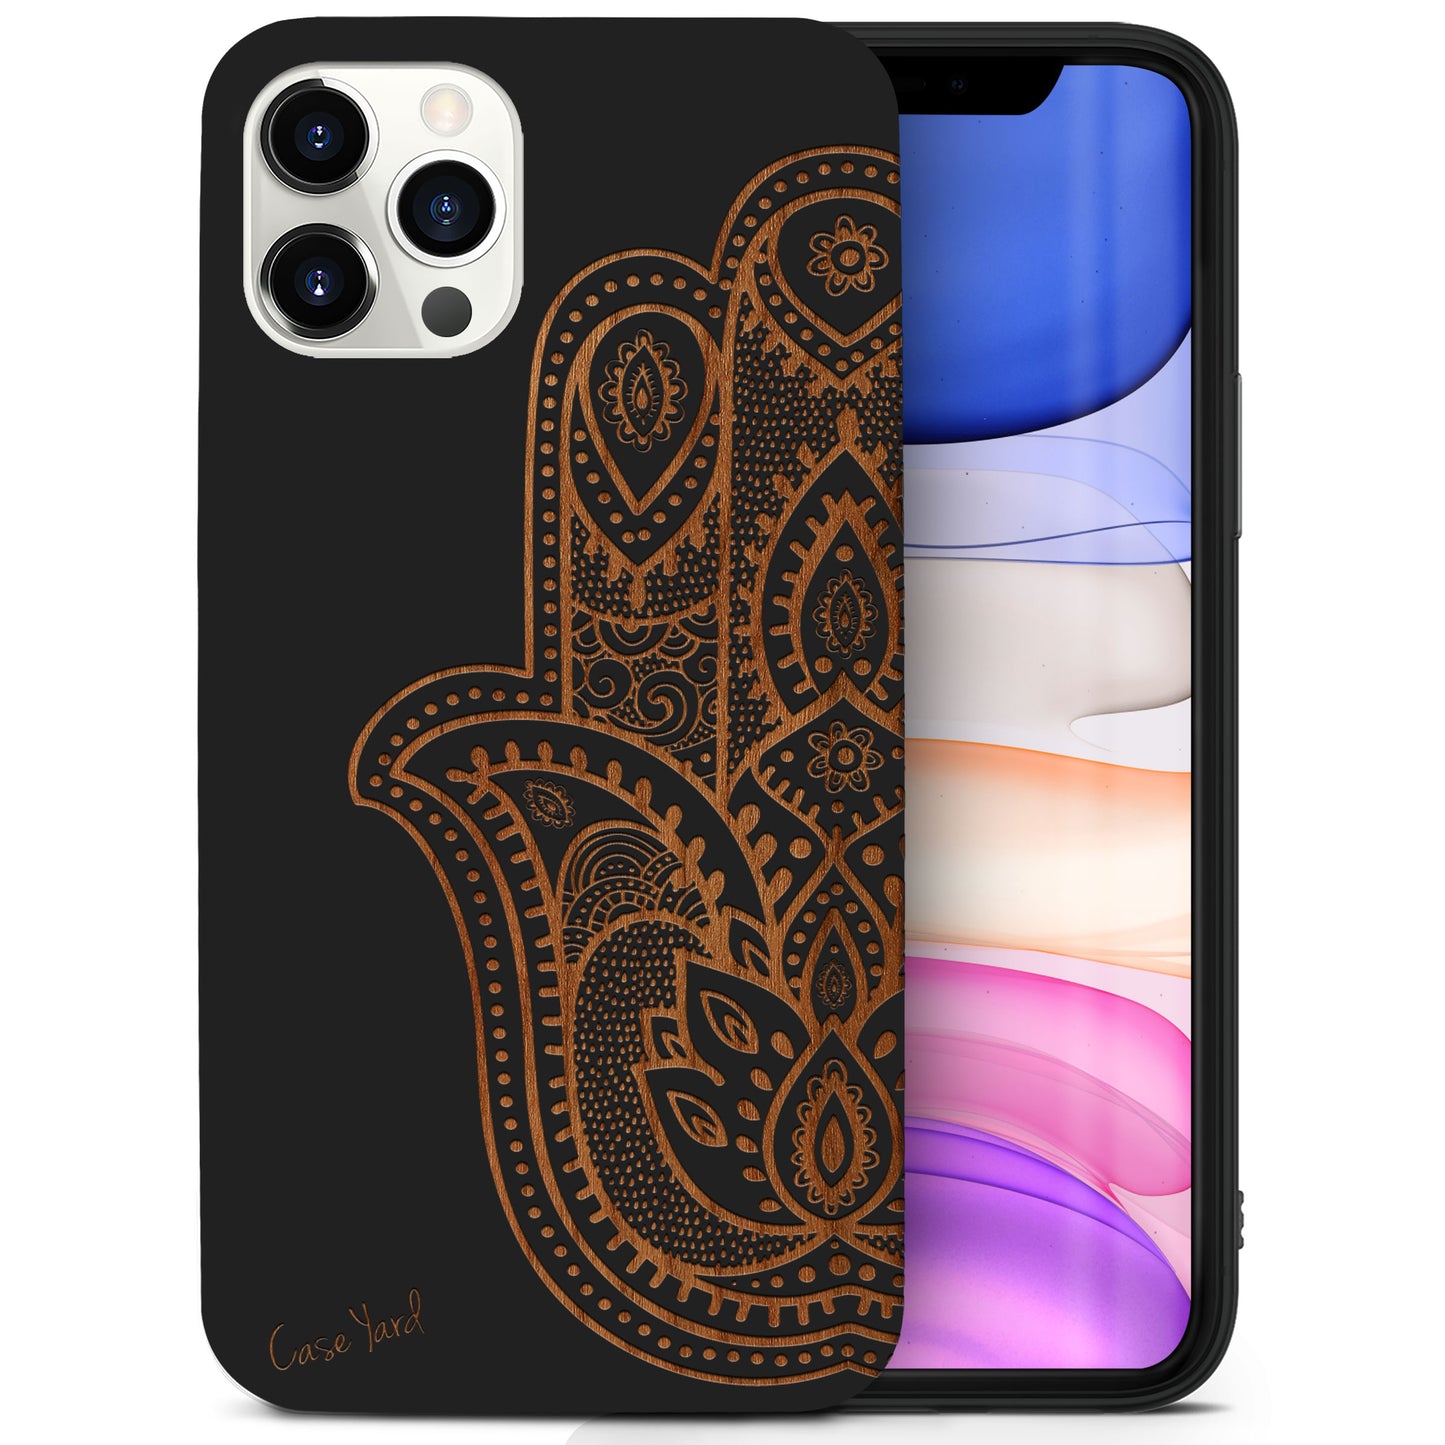 Wooden Cell Phone Case Cover, Laser Engraved case for iPhone & Samsung phone Half Hamsa Hand Wood Design